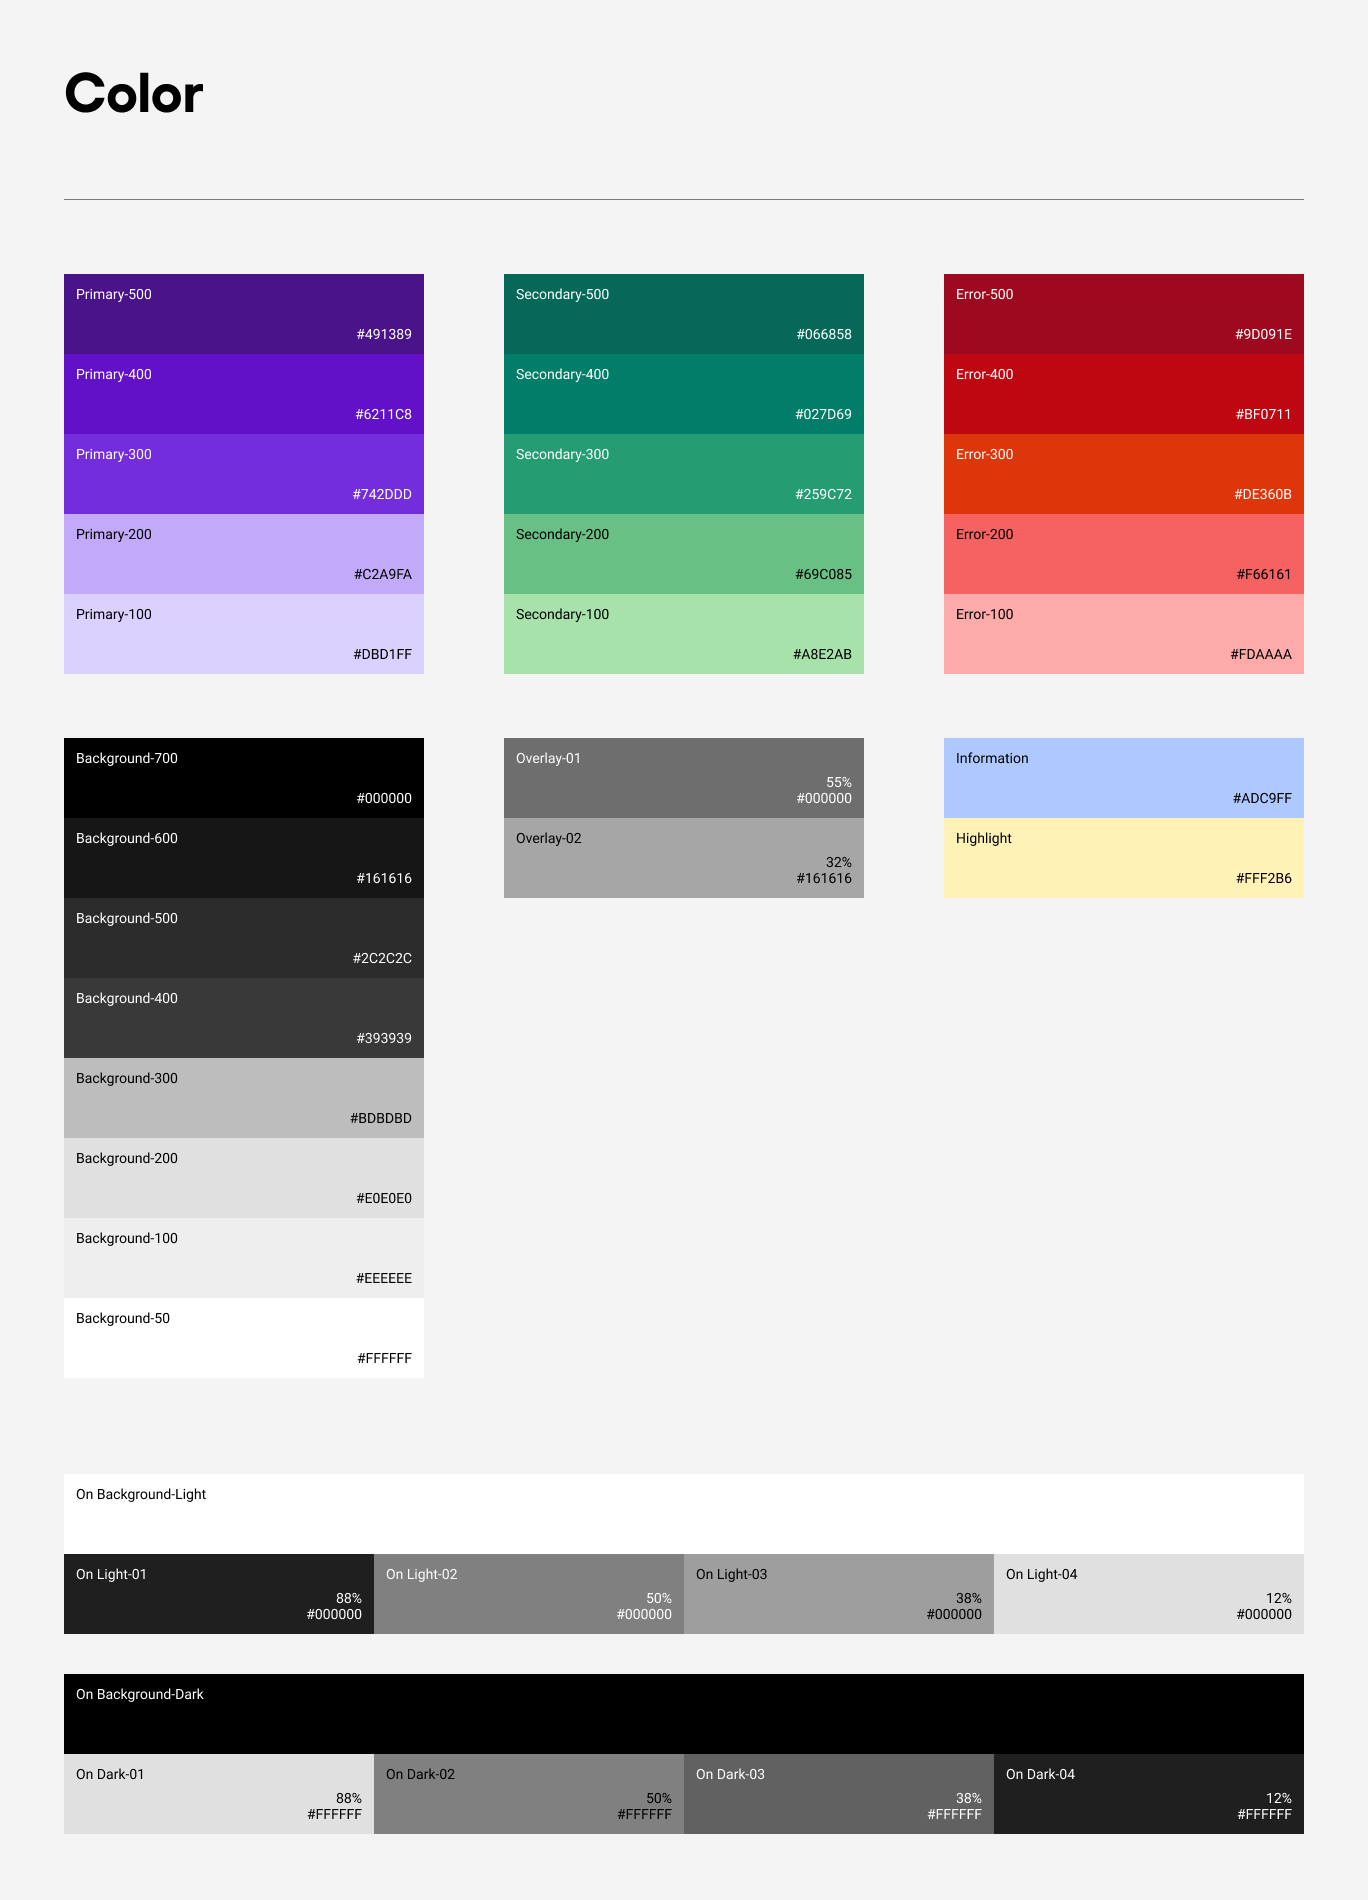 Image|An image of the color resource.